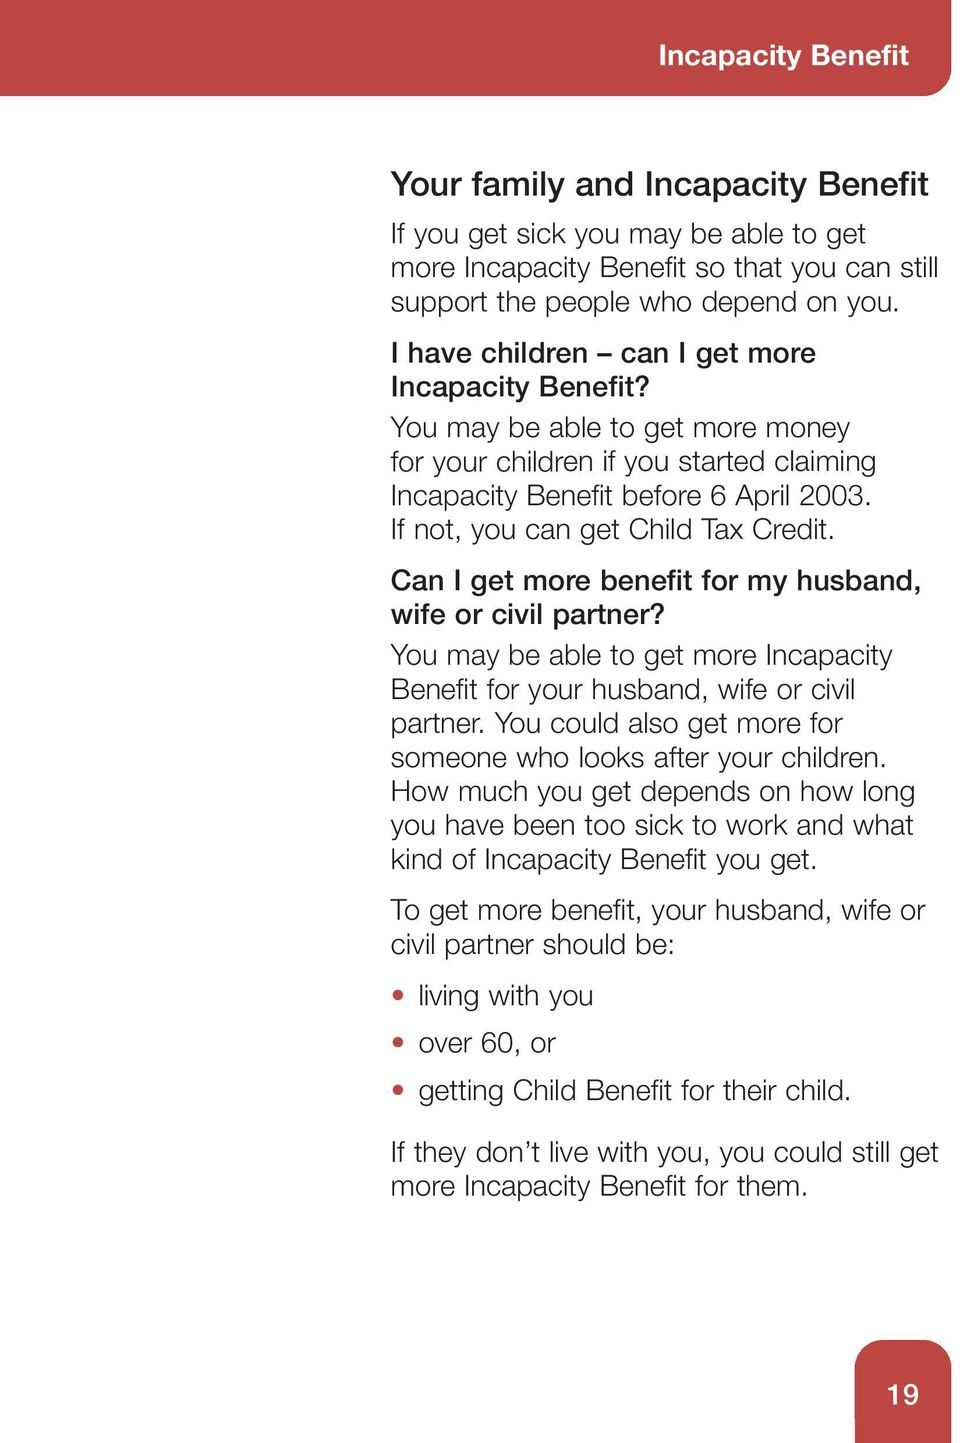 If not, you can get Child Tax Credit. Can I get more benefit for my husband, wife or civil partner? You may be able to get more Incapacity Benefit for your husband, wife or civil partner.